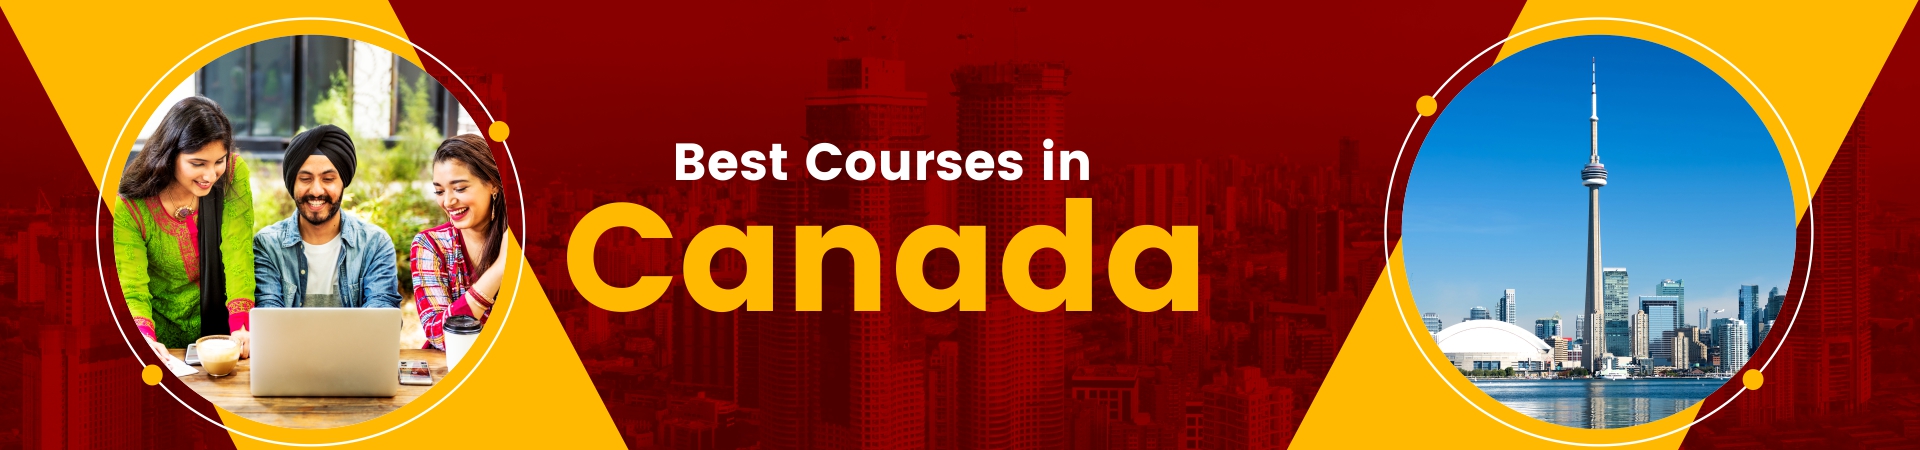 Best courses to study in Canada